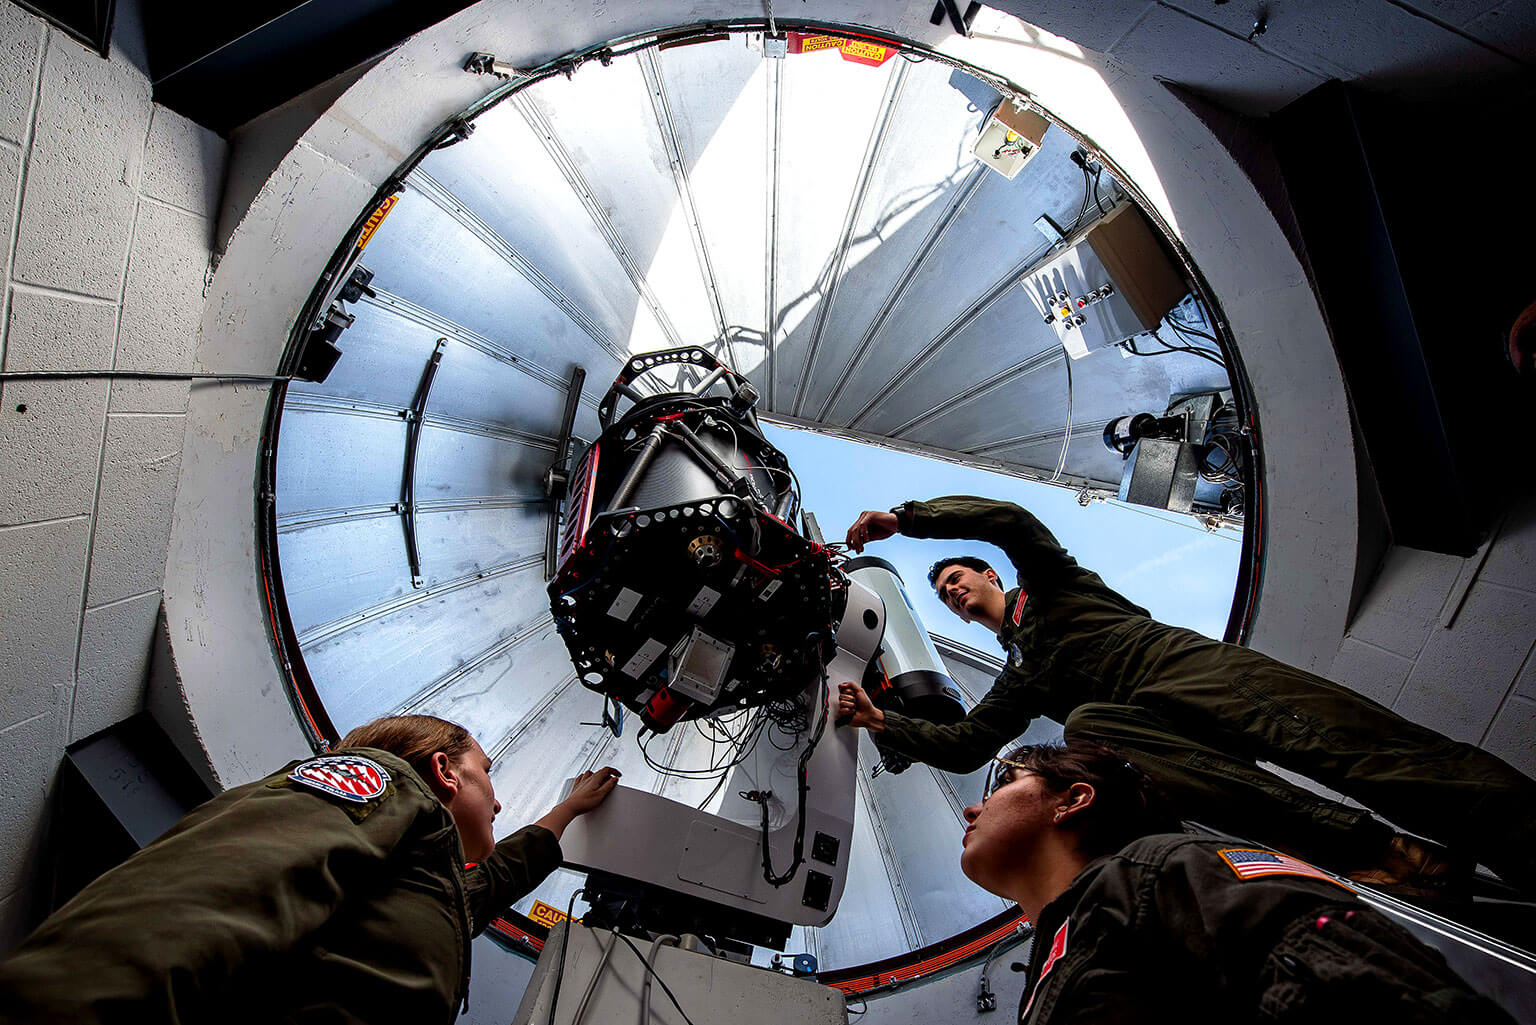 Cadet 2nd Class Brianna McVay, left, and Cadet 3rd Class Bethany Firooz watch as Cadet 3rd Class Ryan Kovacs makes minor modifications to the 0.5-meter Falcon telescope in the U.S. Air Force Academy Observatory.